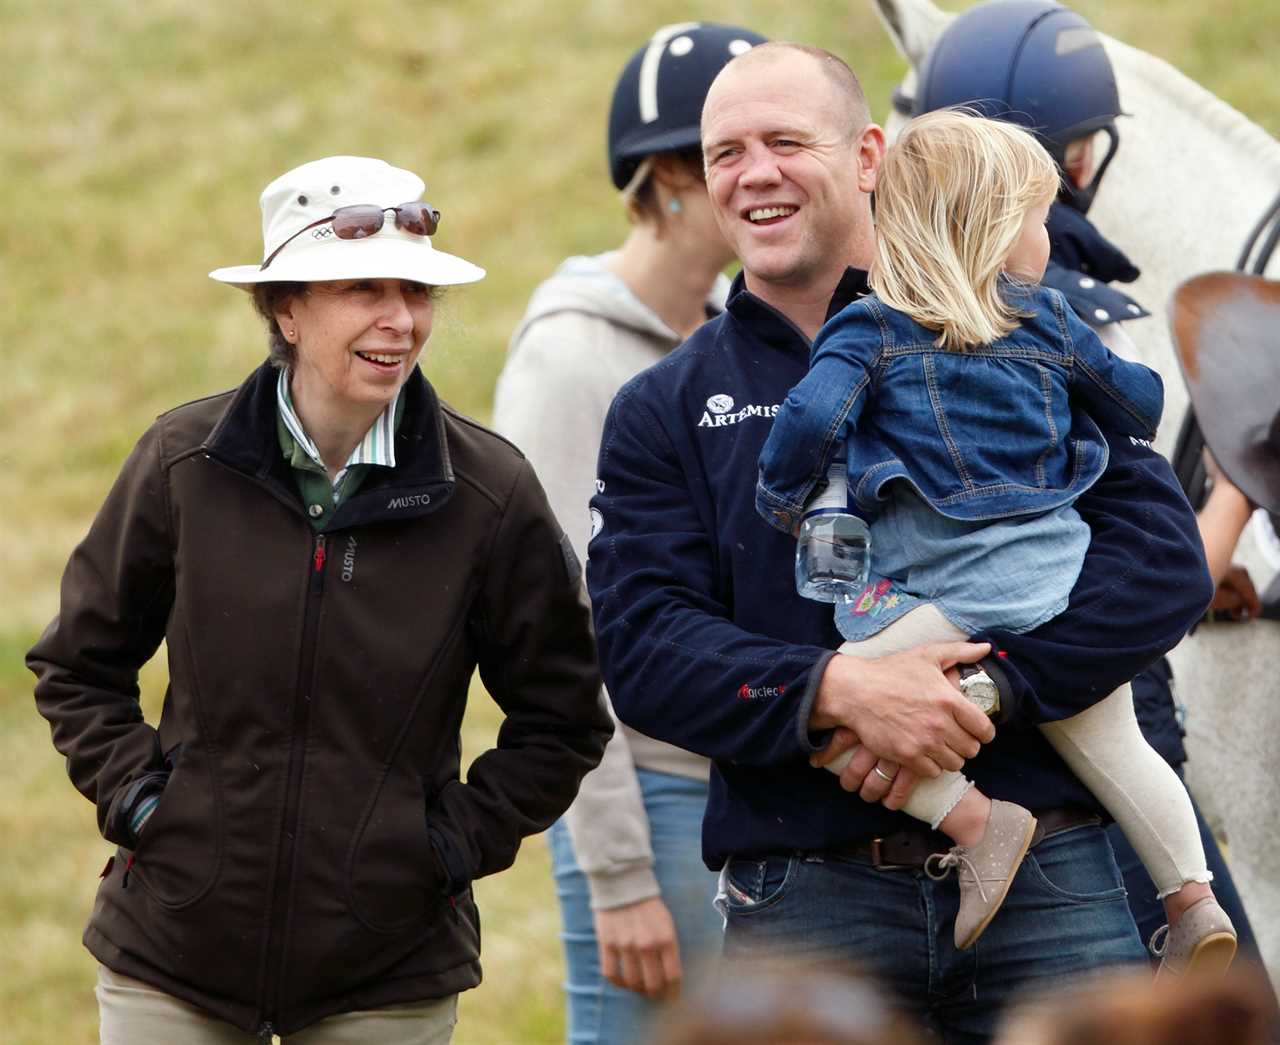 I’m A Celeb star Mike Tindall reveals he flashed his pants at Princess Anne during wife Zara’s birthday bash